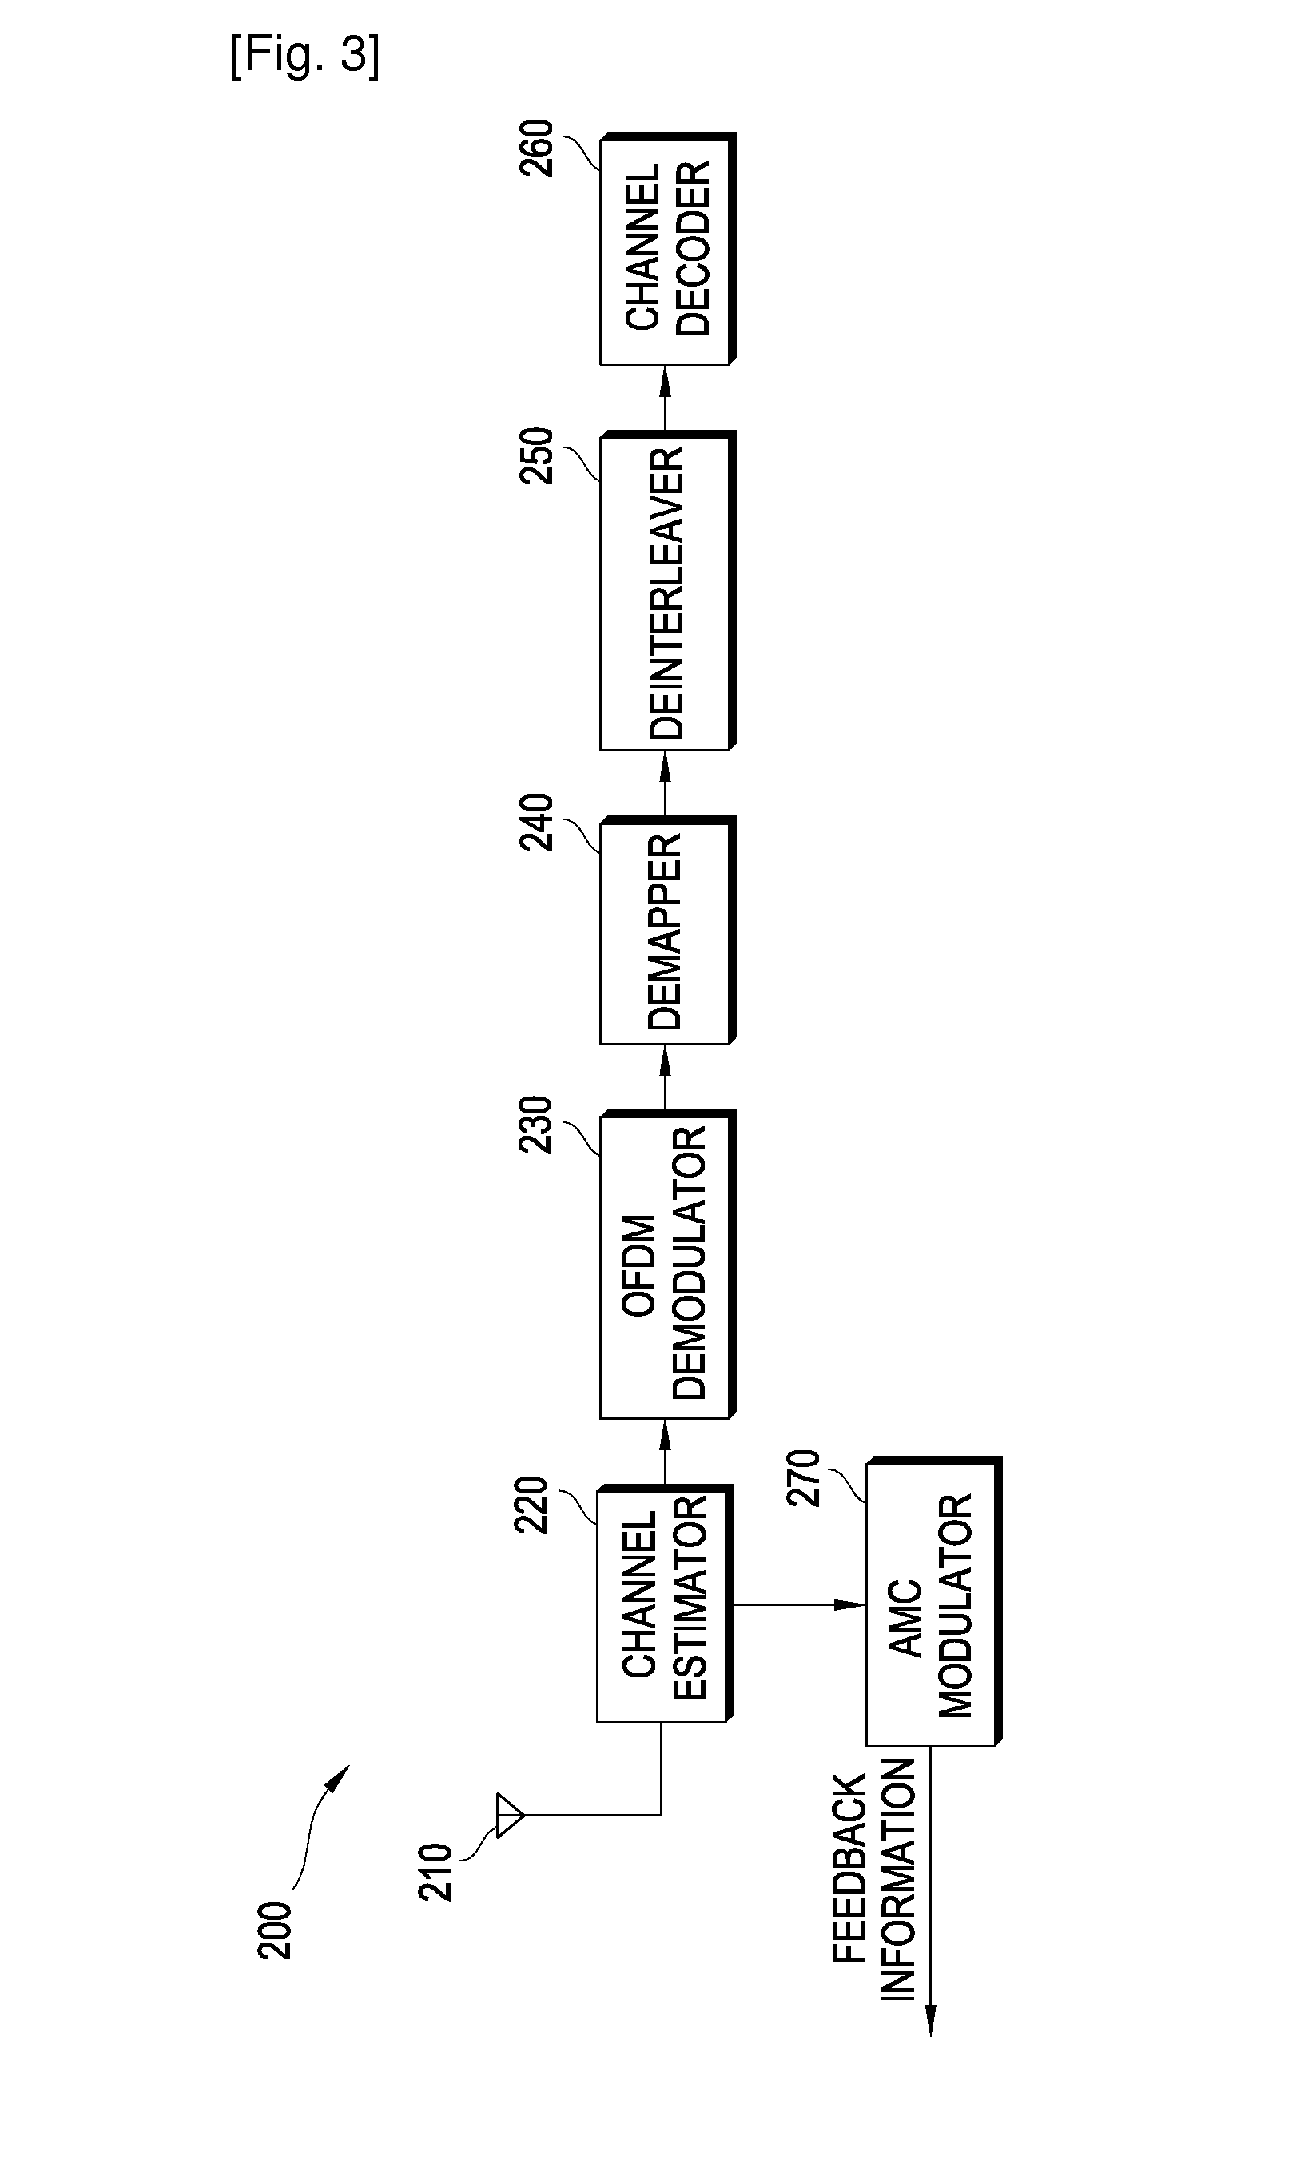 Method for determining modulation and coding scheme